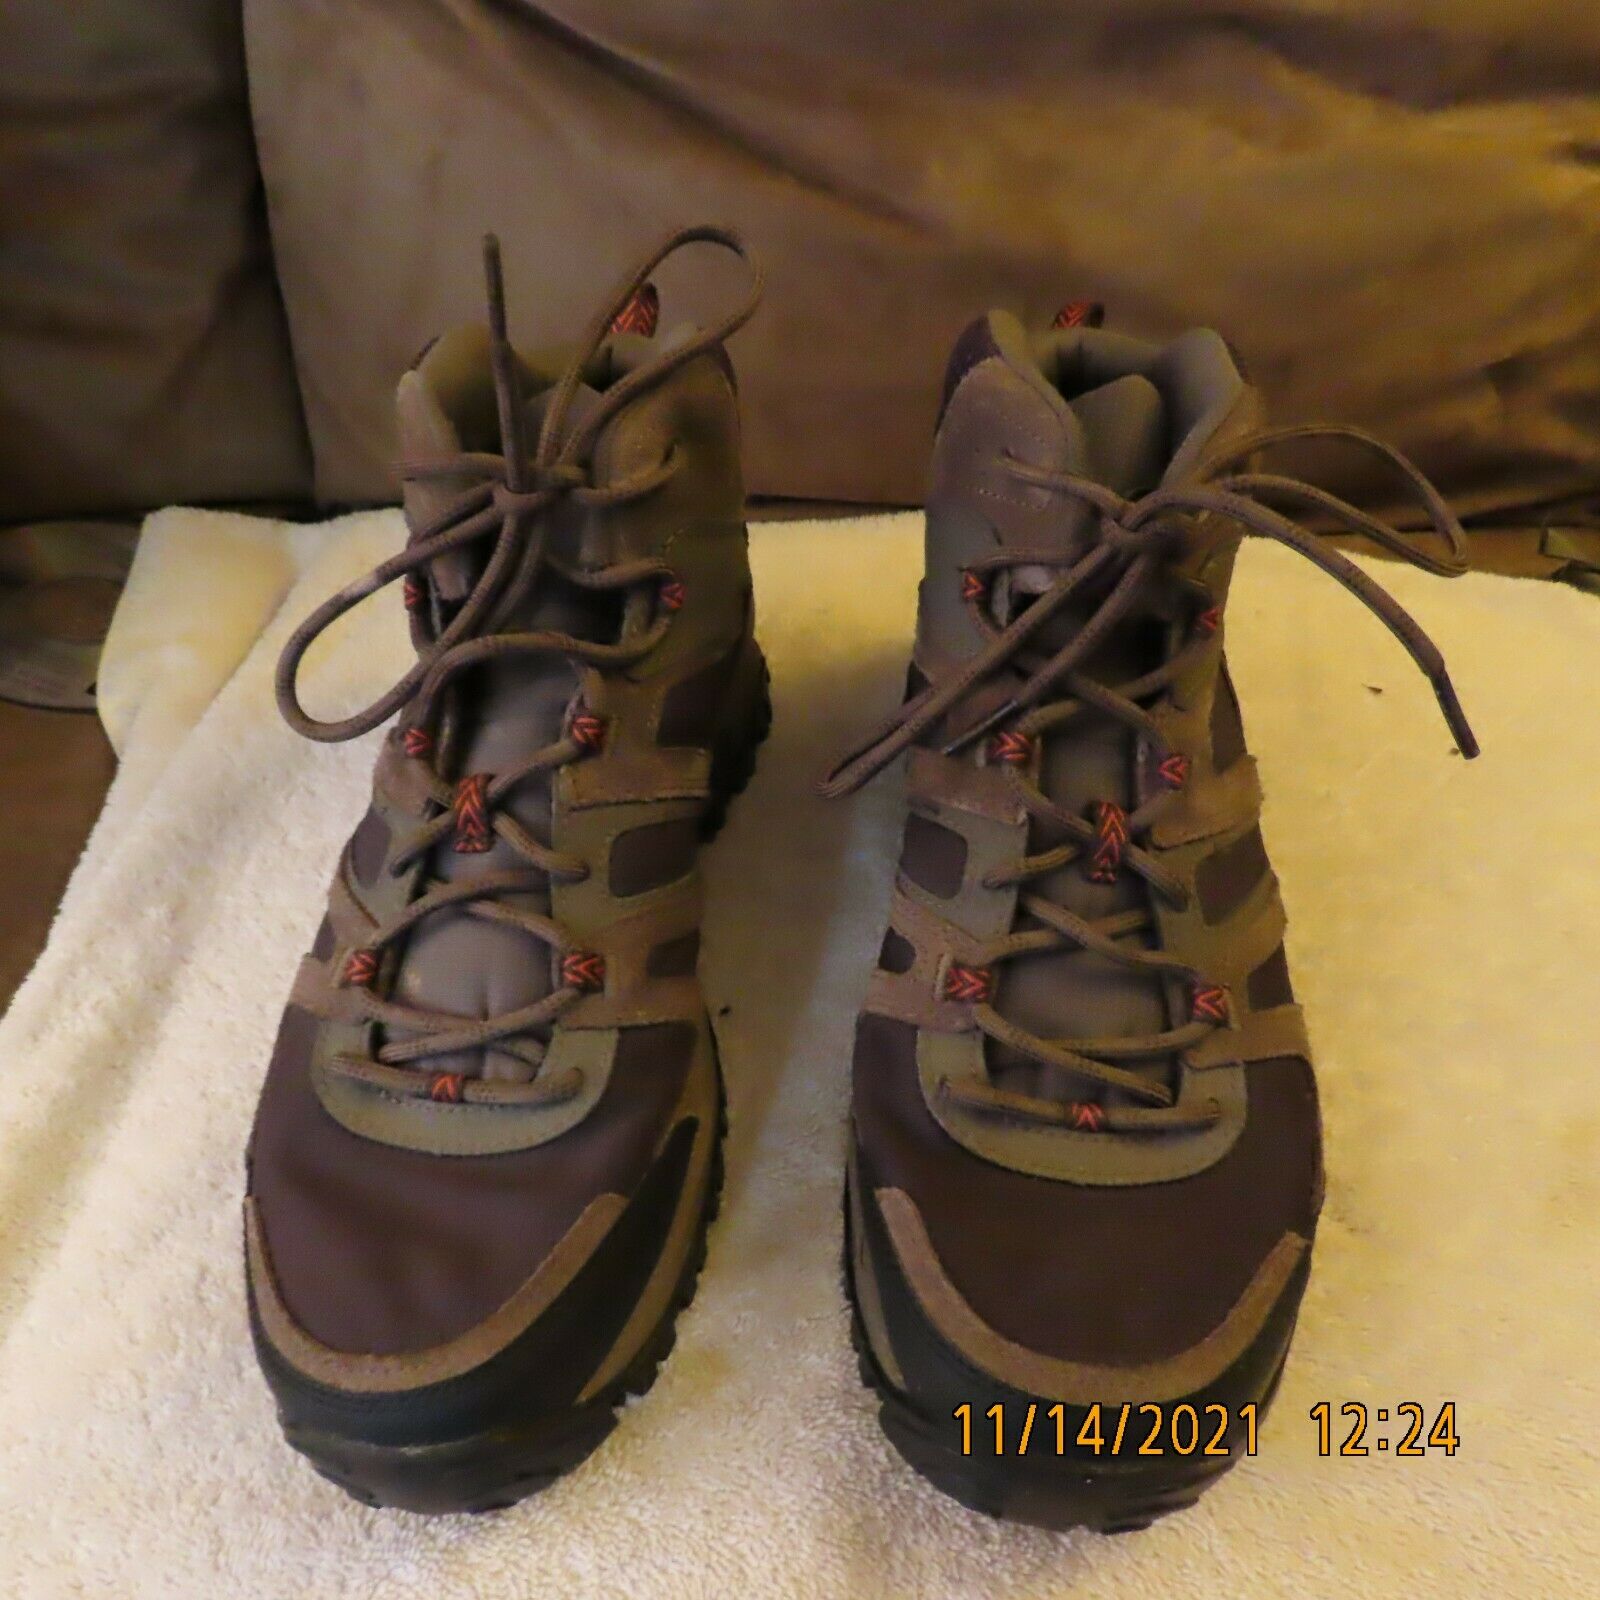 Columbia Men's Mid Hiking Boots Size 10.5 BM3913-231 Woodburn GREAT COND